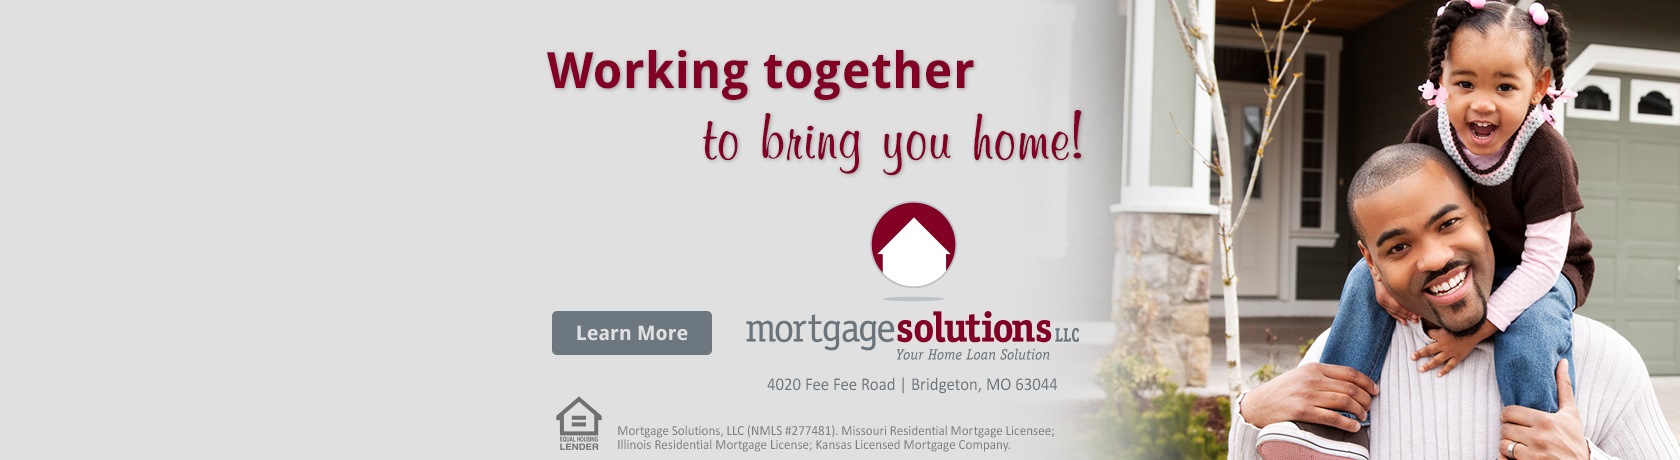 Working together to bring you home! Mortgage Solutions. Learn More